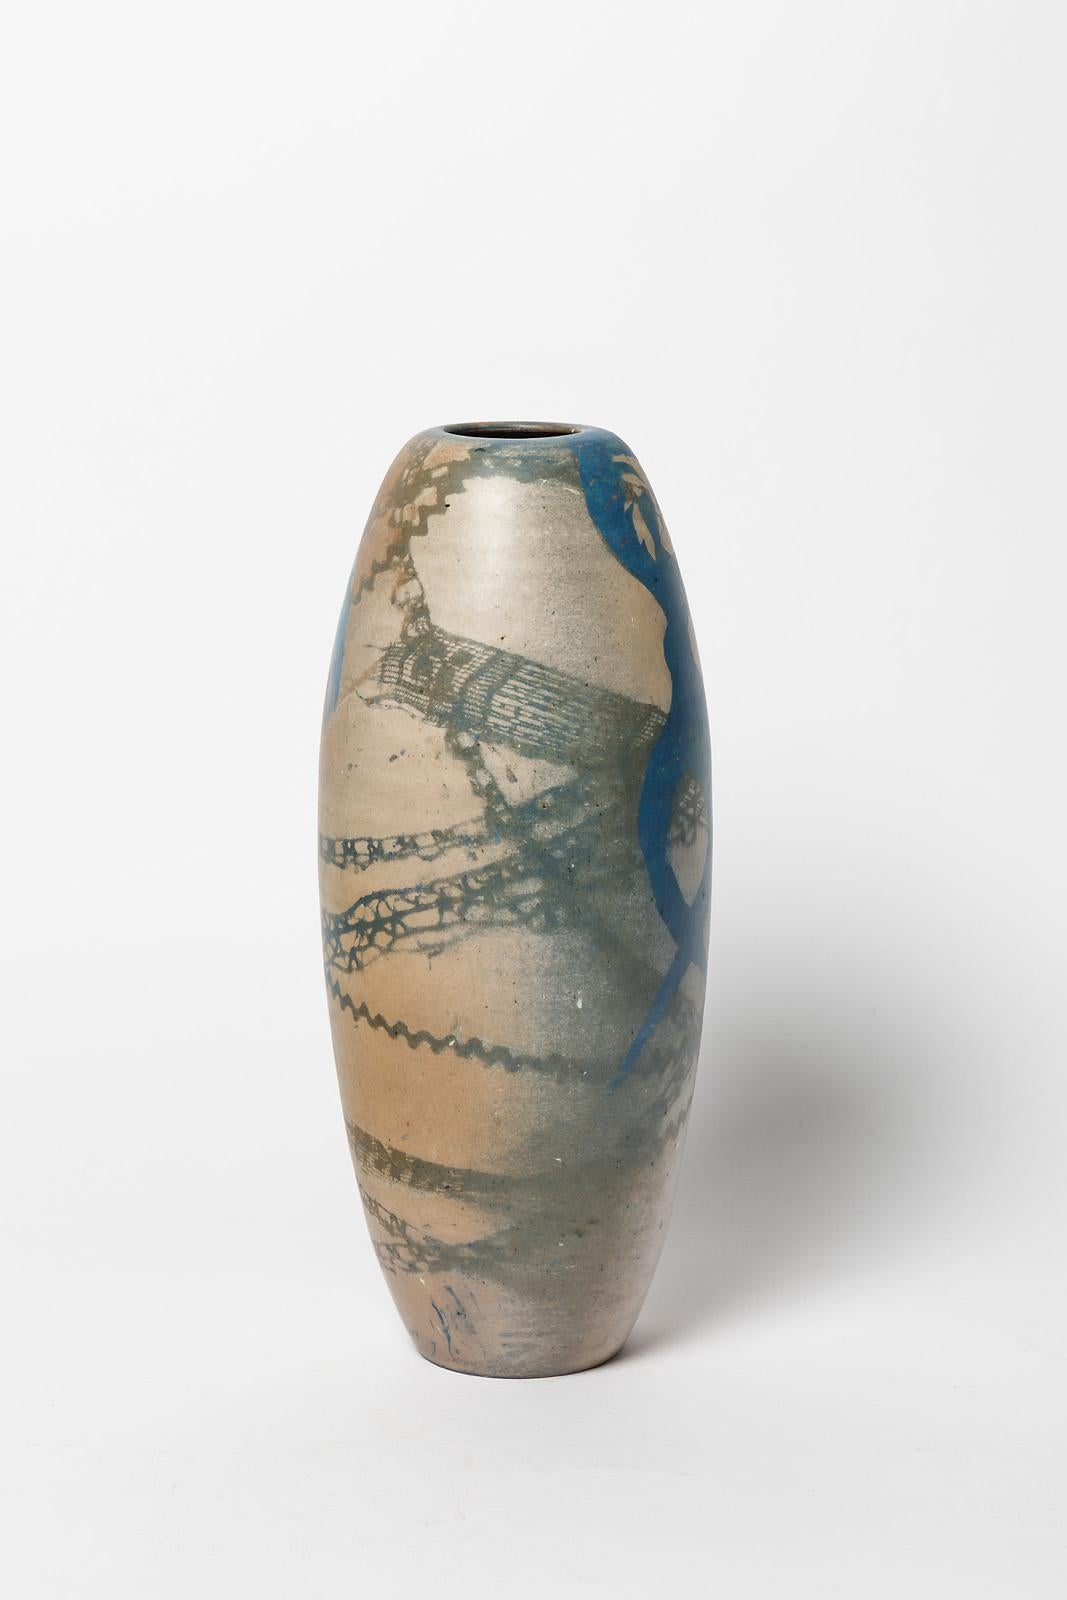 Beaux Arts Ceramic Vase with Abstract Decoration, circa 1980-1990, by Sophie Combres For Sale